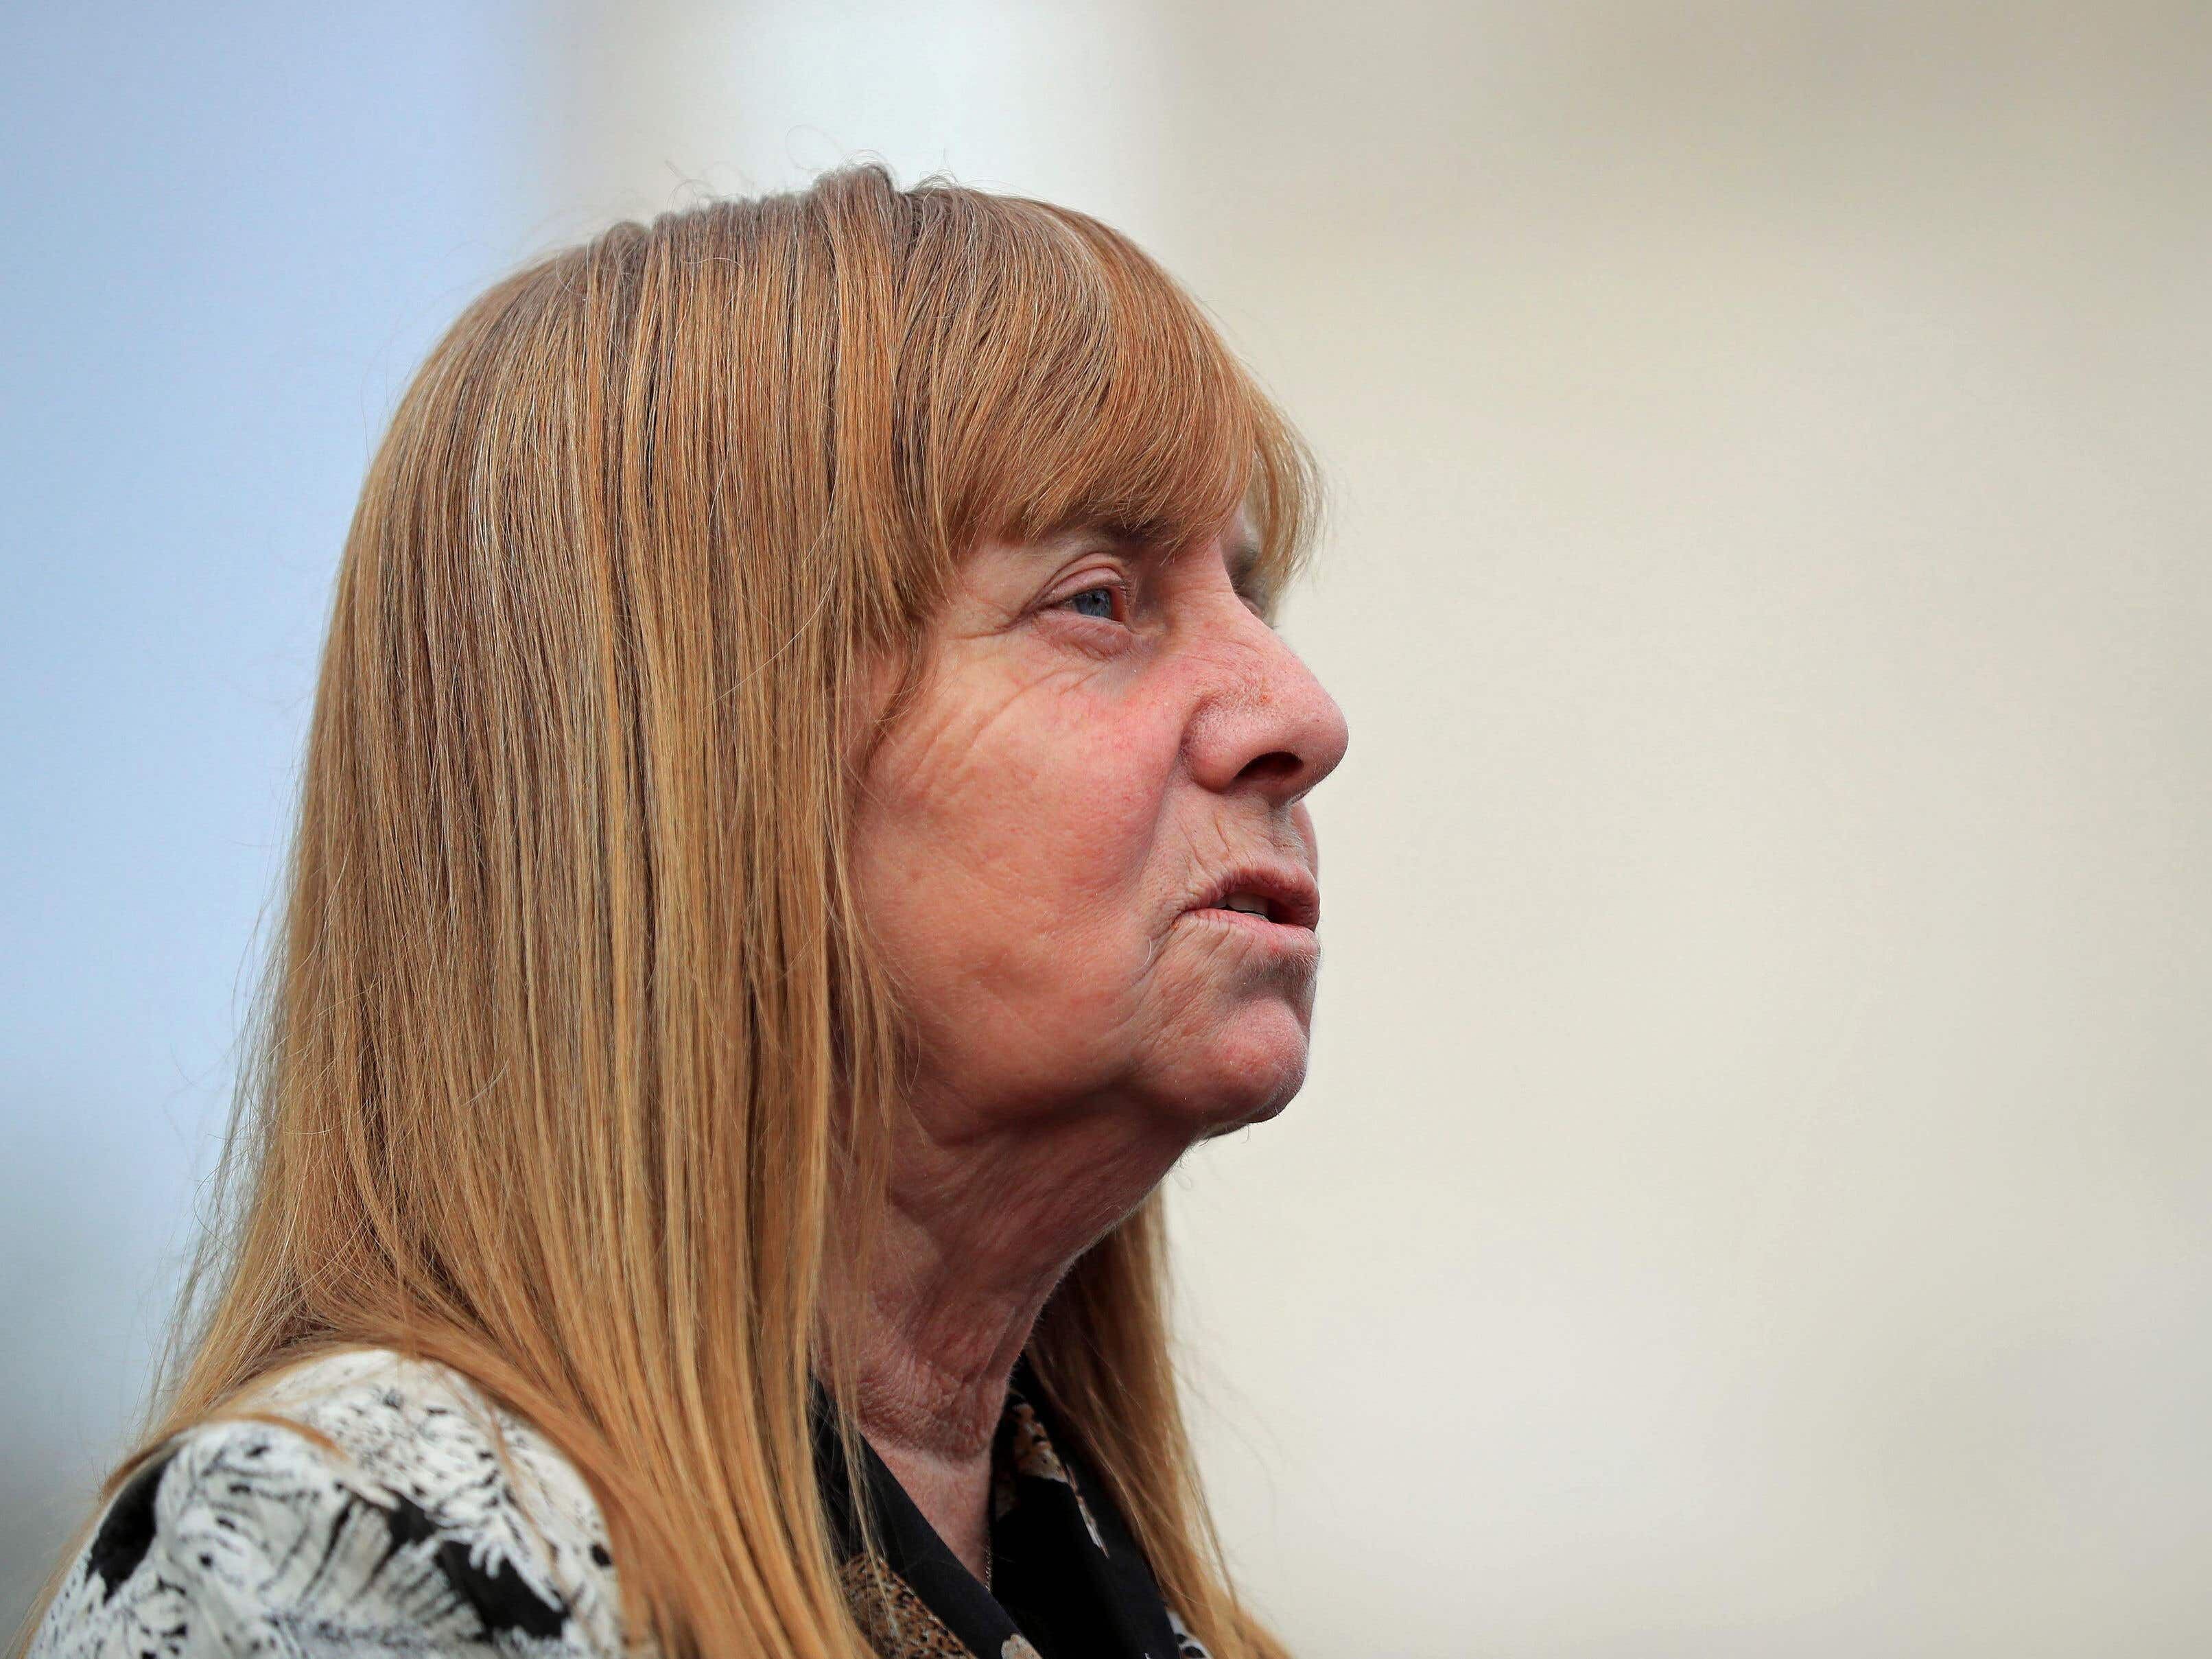 Tragedy chanting causes ‘unbearable pain’ and must stop – Margaret Aspinall